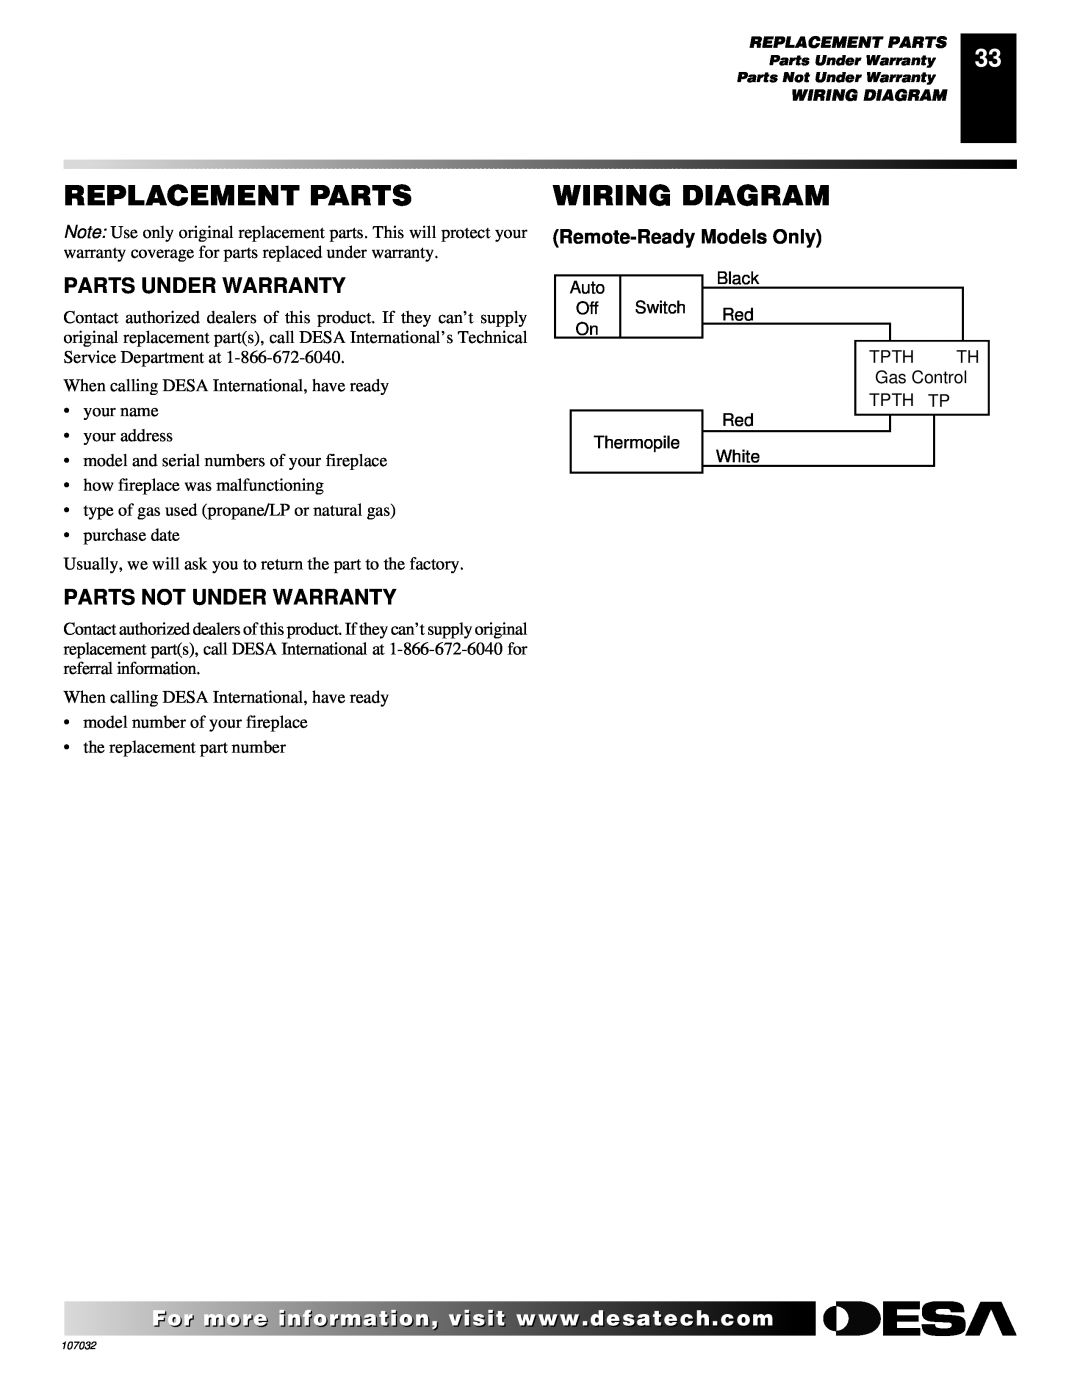 Desa VMH10TPB Replacement Parts, Wiring Diagram, Parts Under Warranty, Parts Not Under Warranty, Remote-ReadyModels Only 